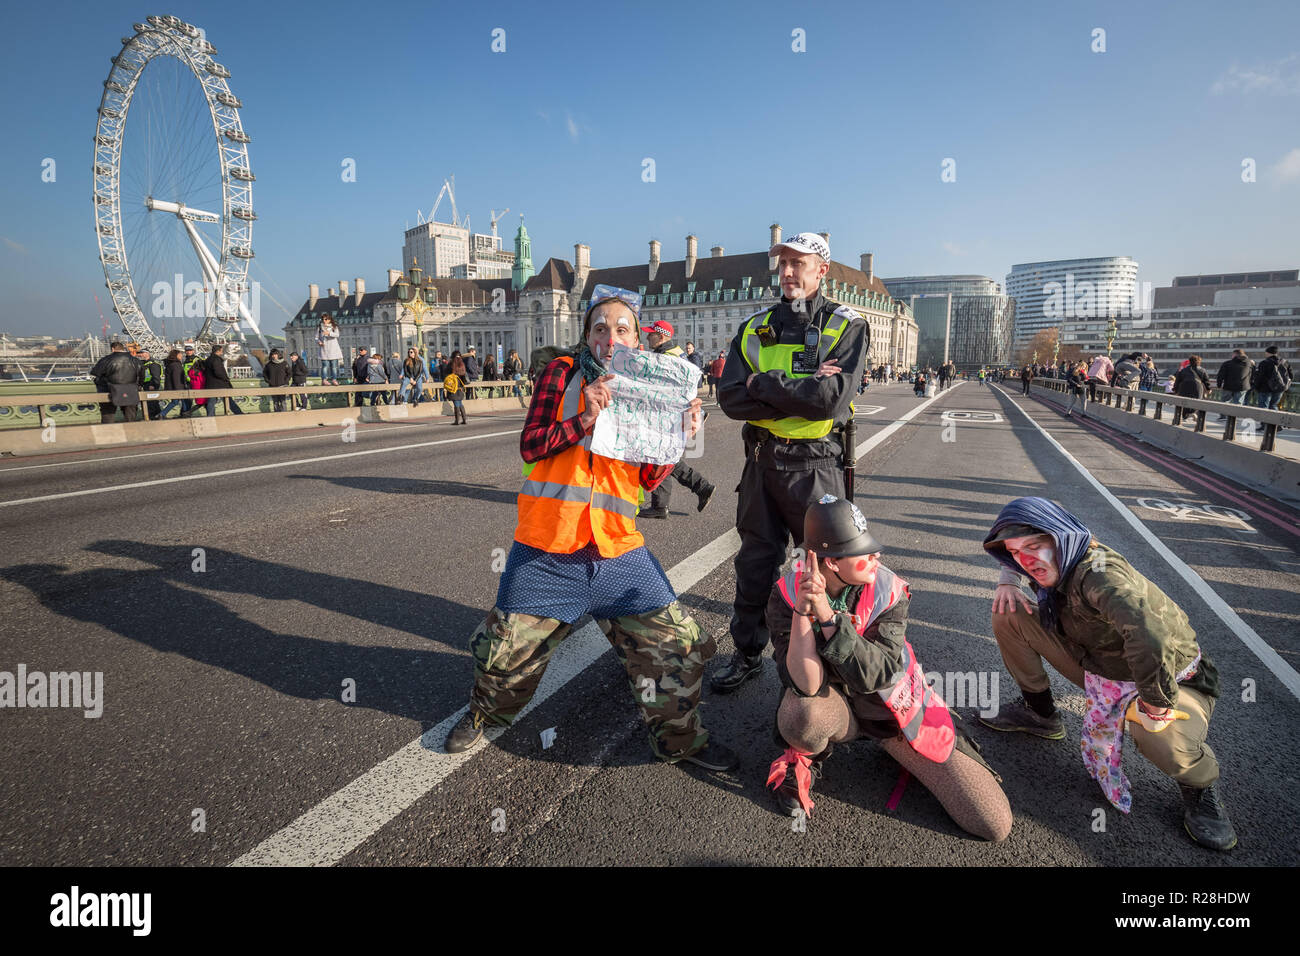 London, UK. 17th November, 2018. Environmental campaigners from Extinction Rebellion block Westminster Bridge, one of five bridges blocked in central London, as part of a Rebellion Day event to highlight 'criminal inaction in the face of climate change catastrophe and ecological collapse' by the UK Government as part of a programme of civil disobedience during which scores of campaigners have been arrested. Credit: Guy Corbishley/Alamy Live News Stock Photo